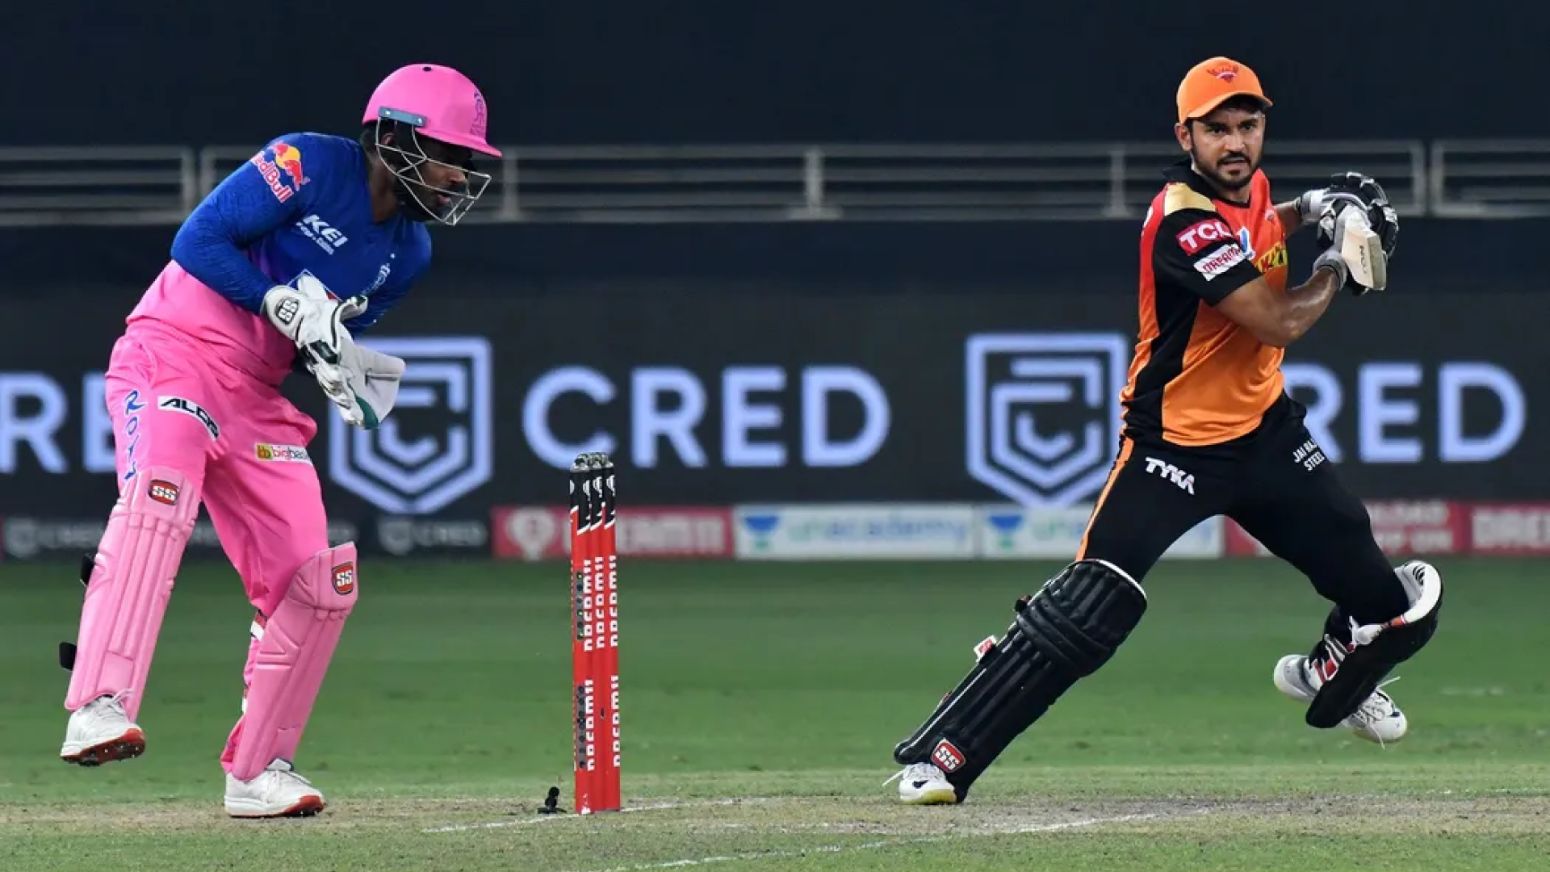 Match Preview: With new skipper in charge, Hyderabad hope to get one past fellow strugglers Rajasthan